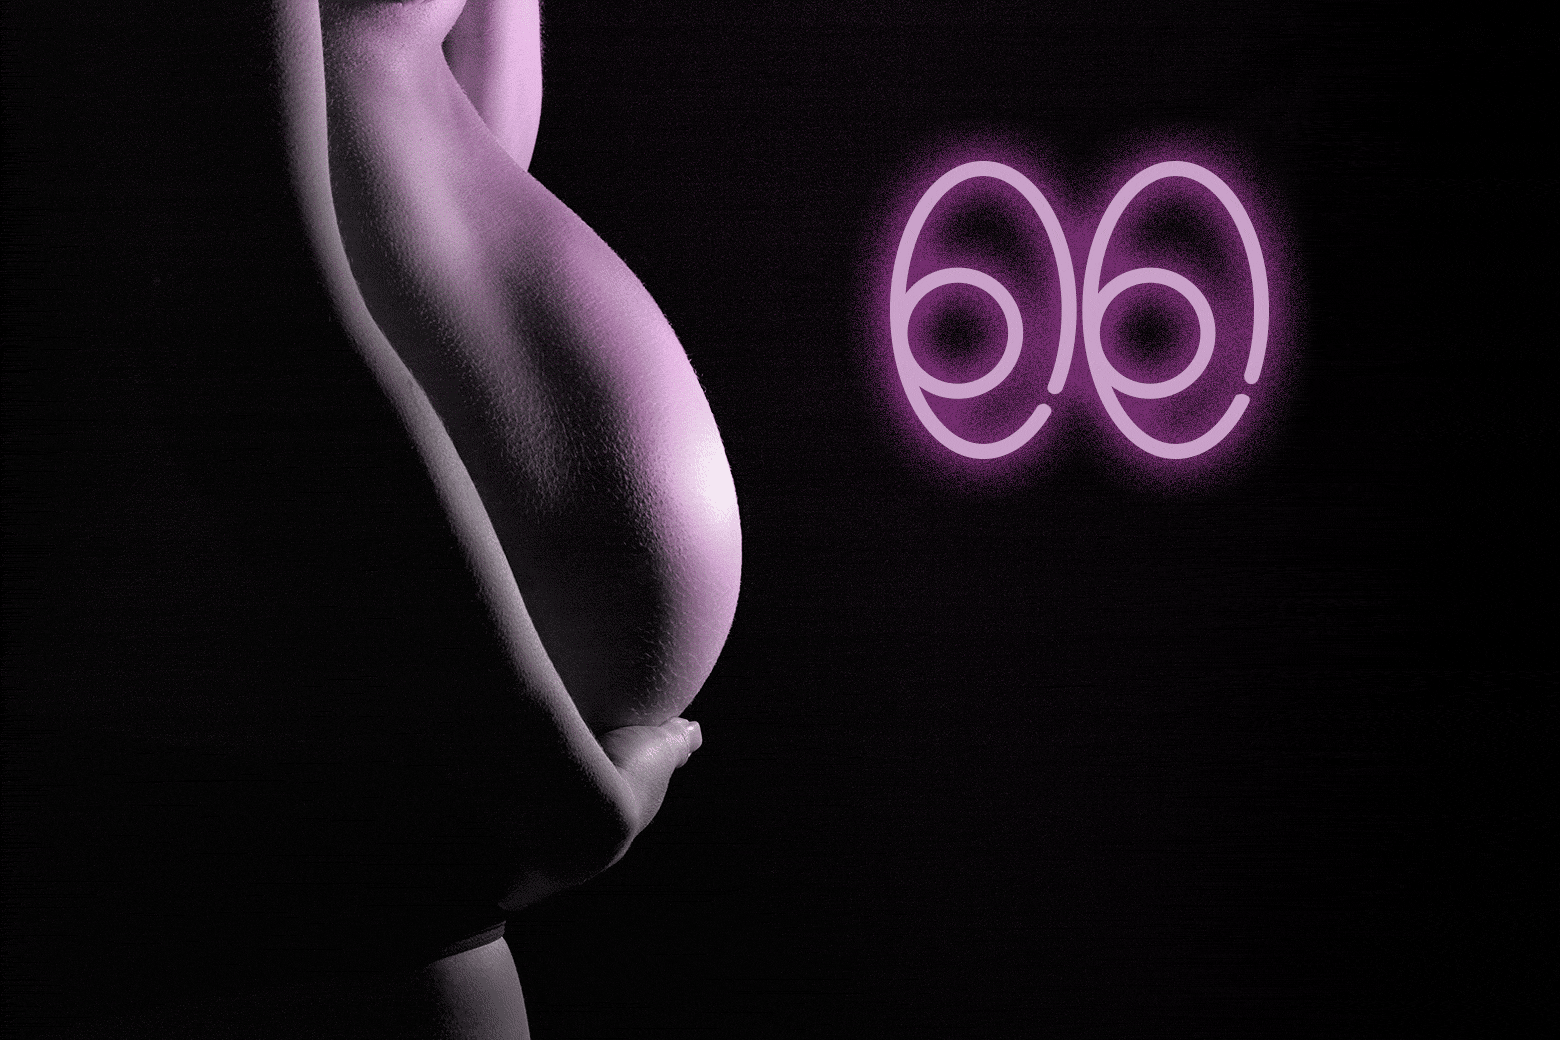 The belly of a pregnant woman bathed in the light of two shifty neon eyes.